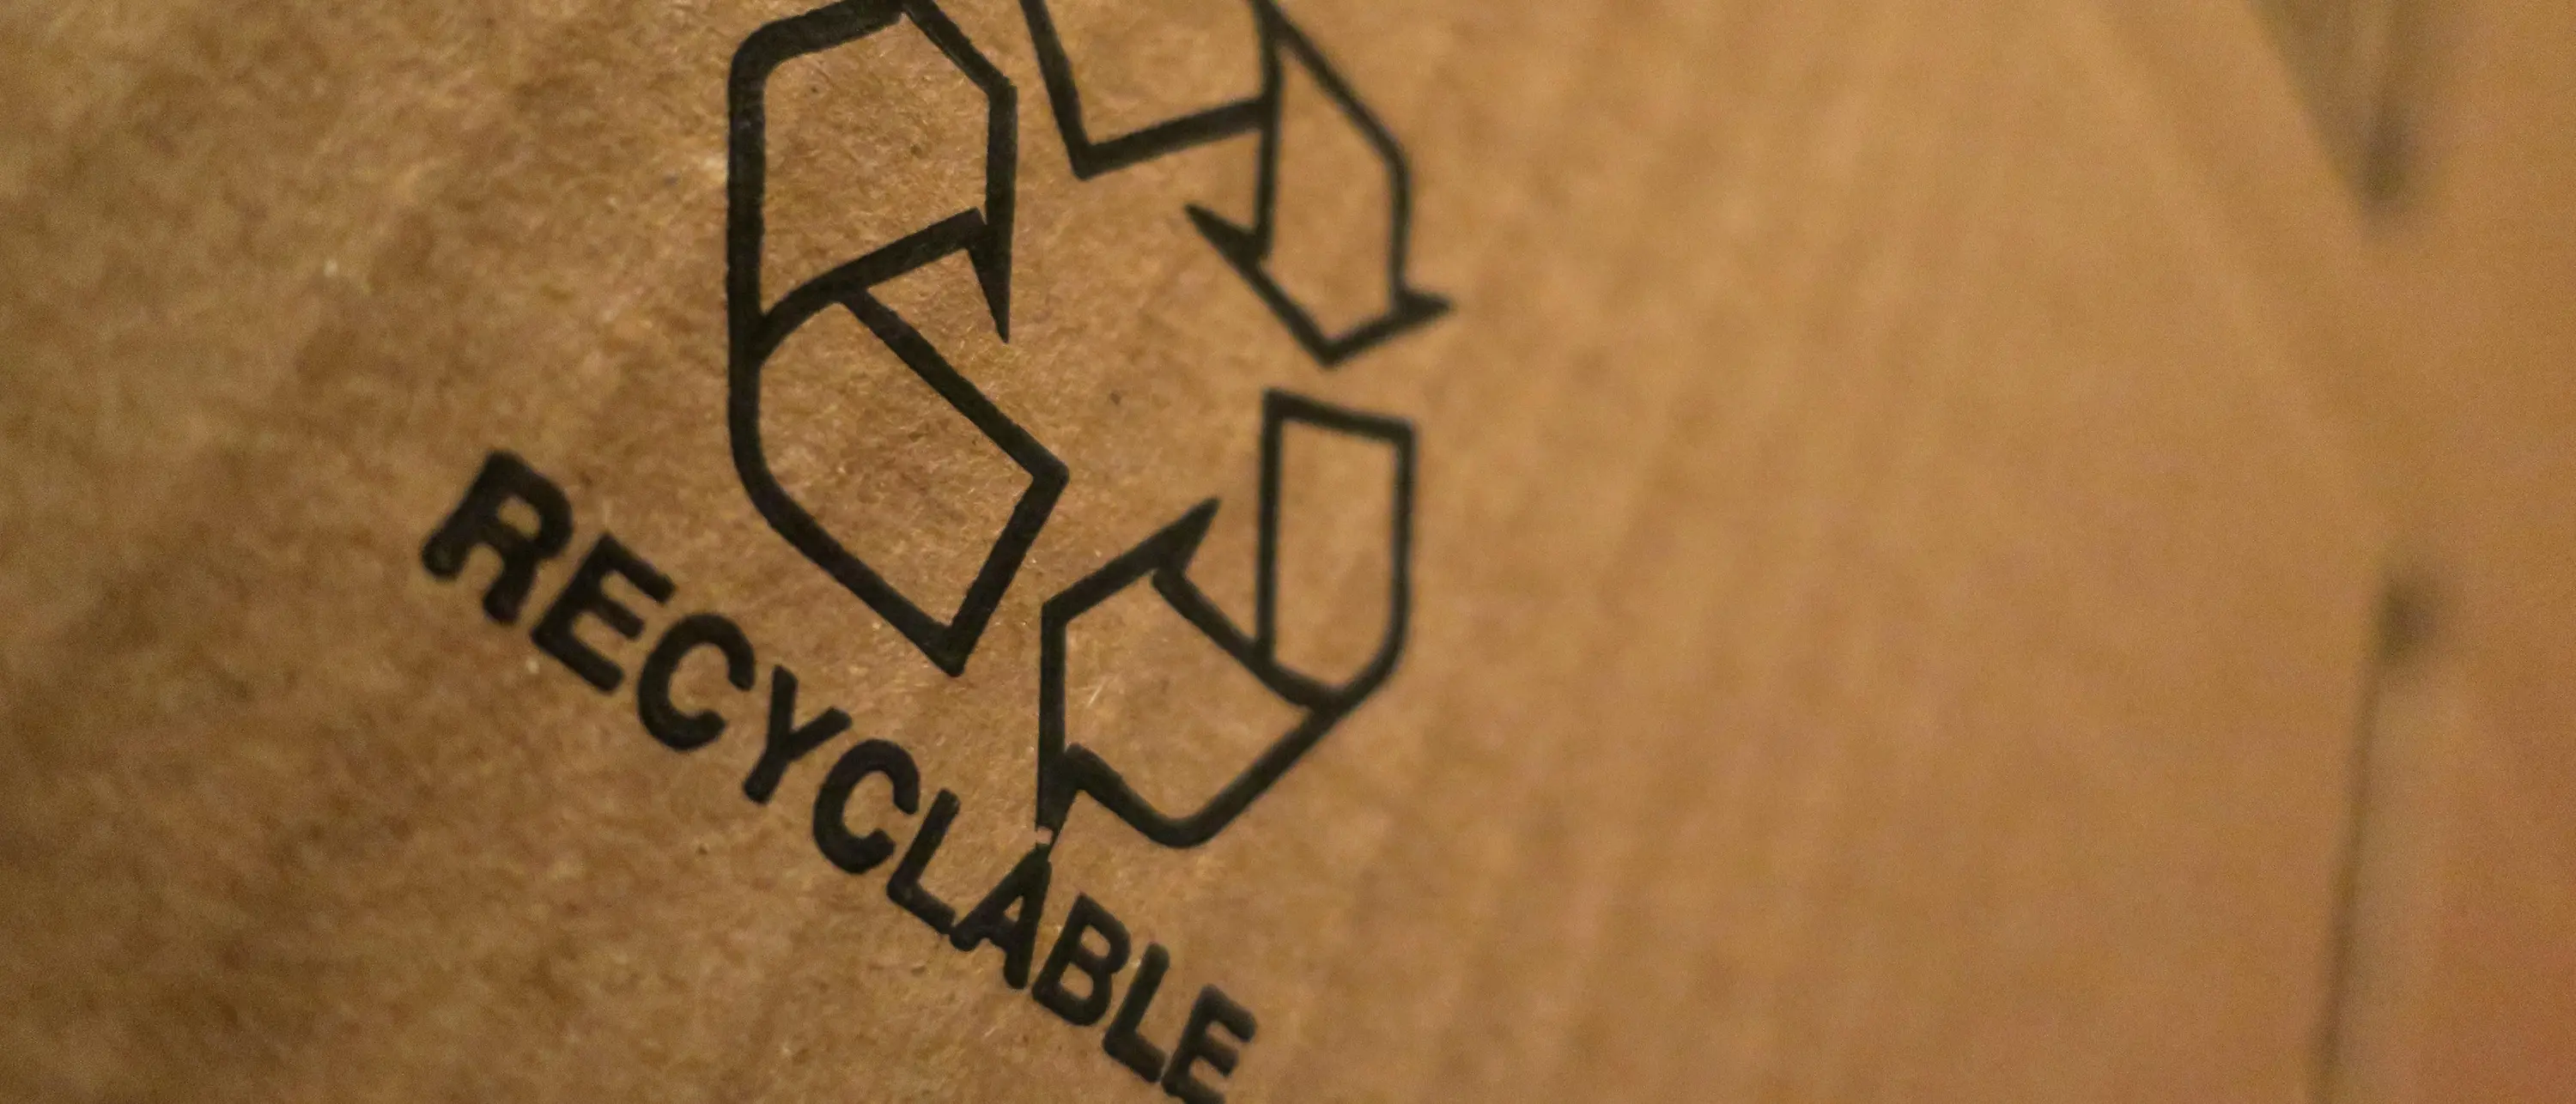 recycling symbol on piece of card board